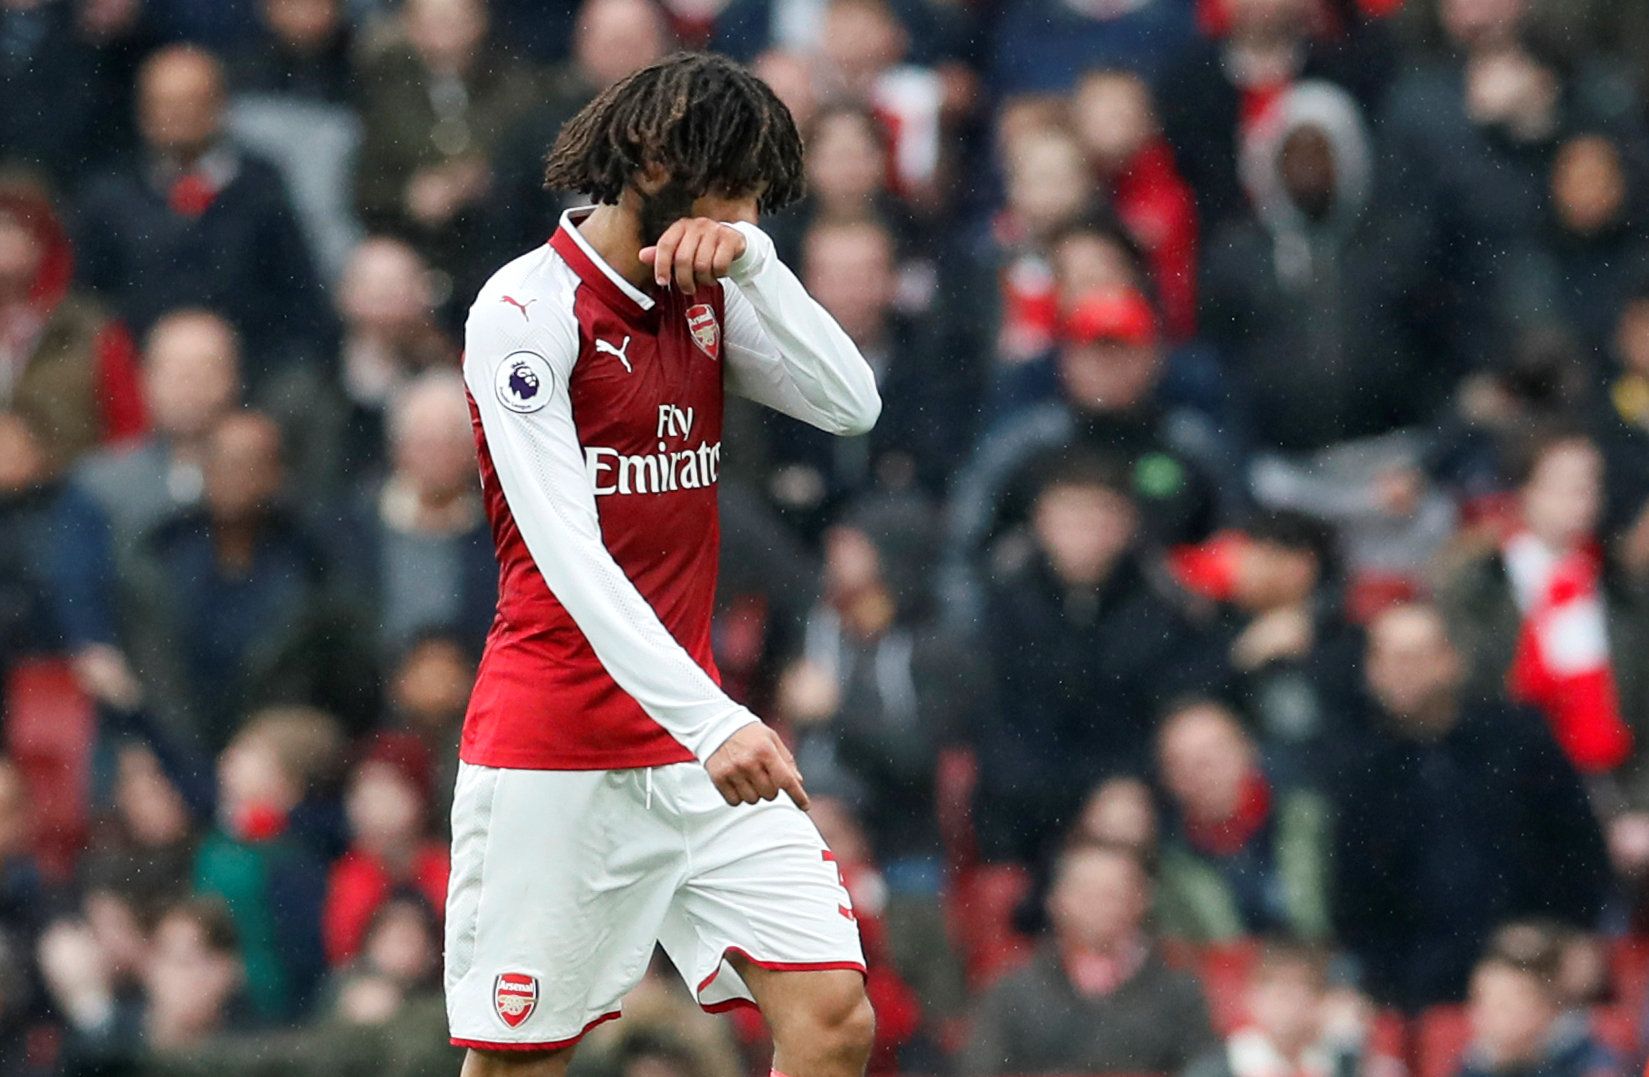 Soccer Football - Premier League - Arsenal vs Southampton - Emirates Stadium, London, Britain - April 8, 2018   Arsenal's Mohamed Elneny walks off dejected after being sent off   REUTERS/David Klein    EDITORIAL USE ONLY. No use with unauthorized audio, video, data, fixture lists, club/league logos or 